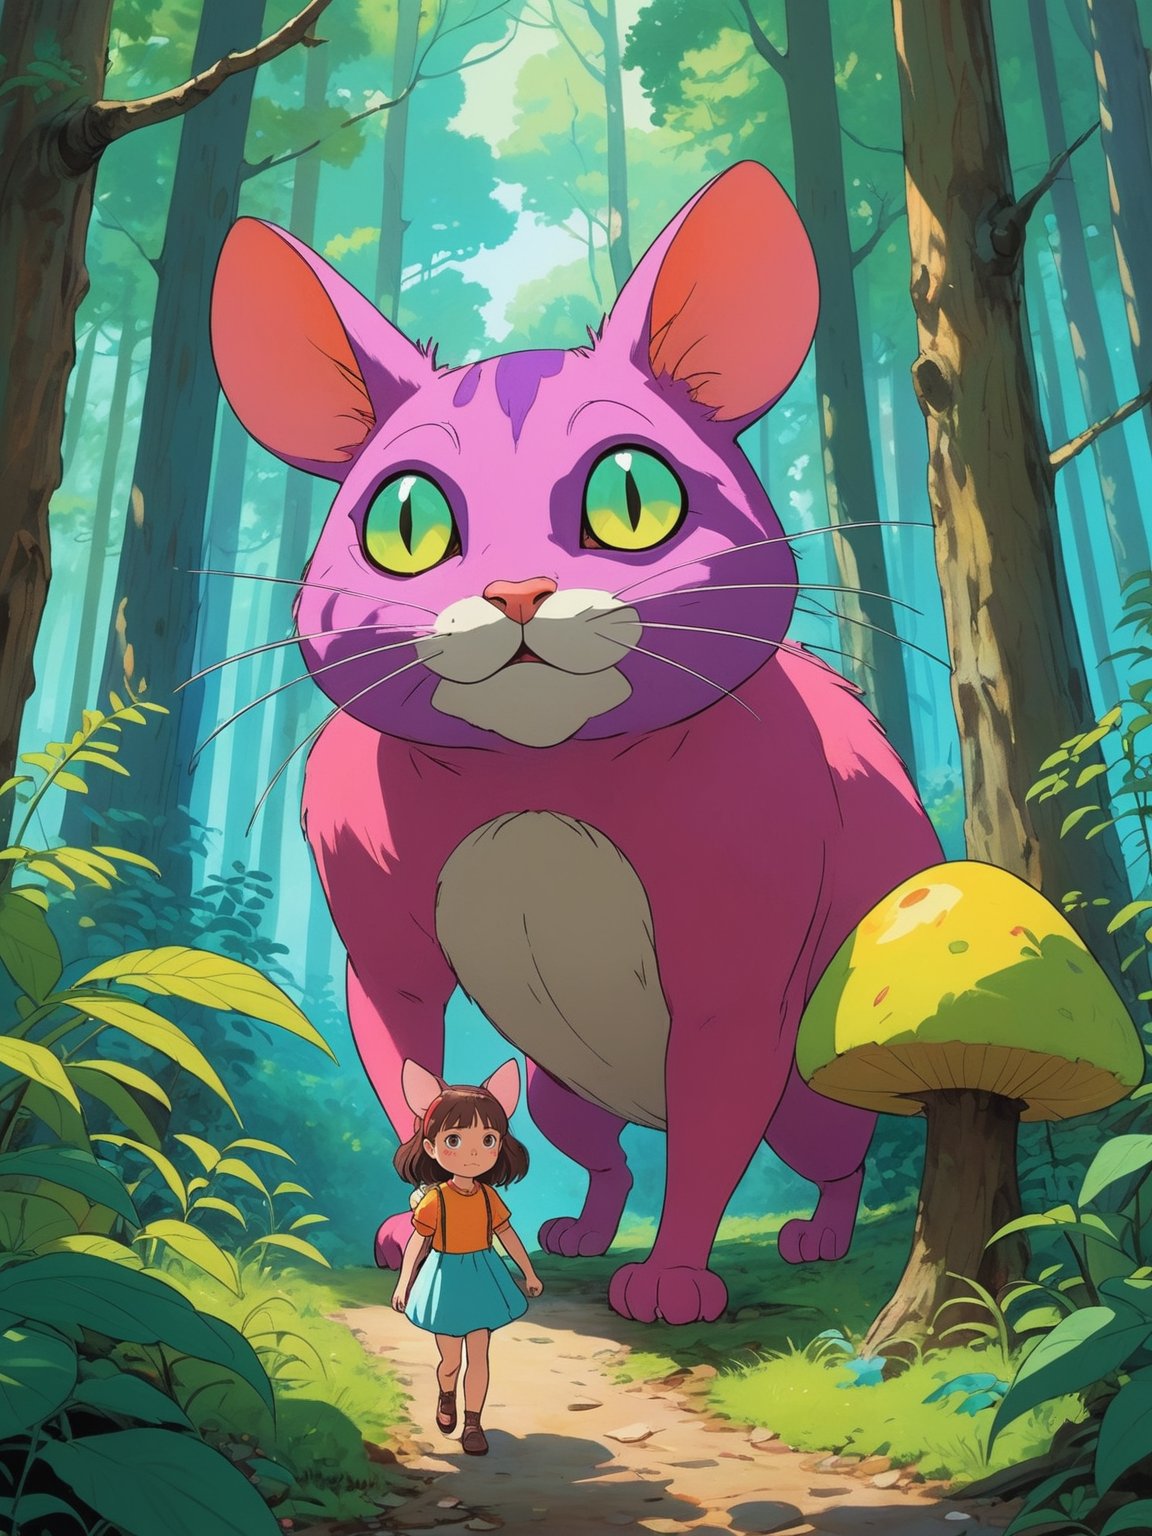 studio ghibli style, a giant colorful ferrocious and scary cat/mouse hybrid exploring the forest with a little girl 